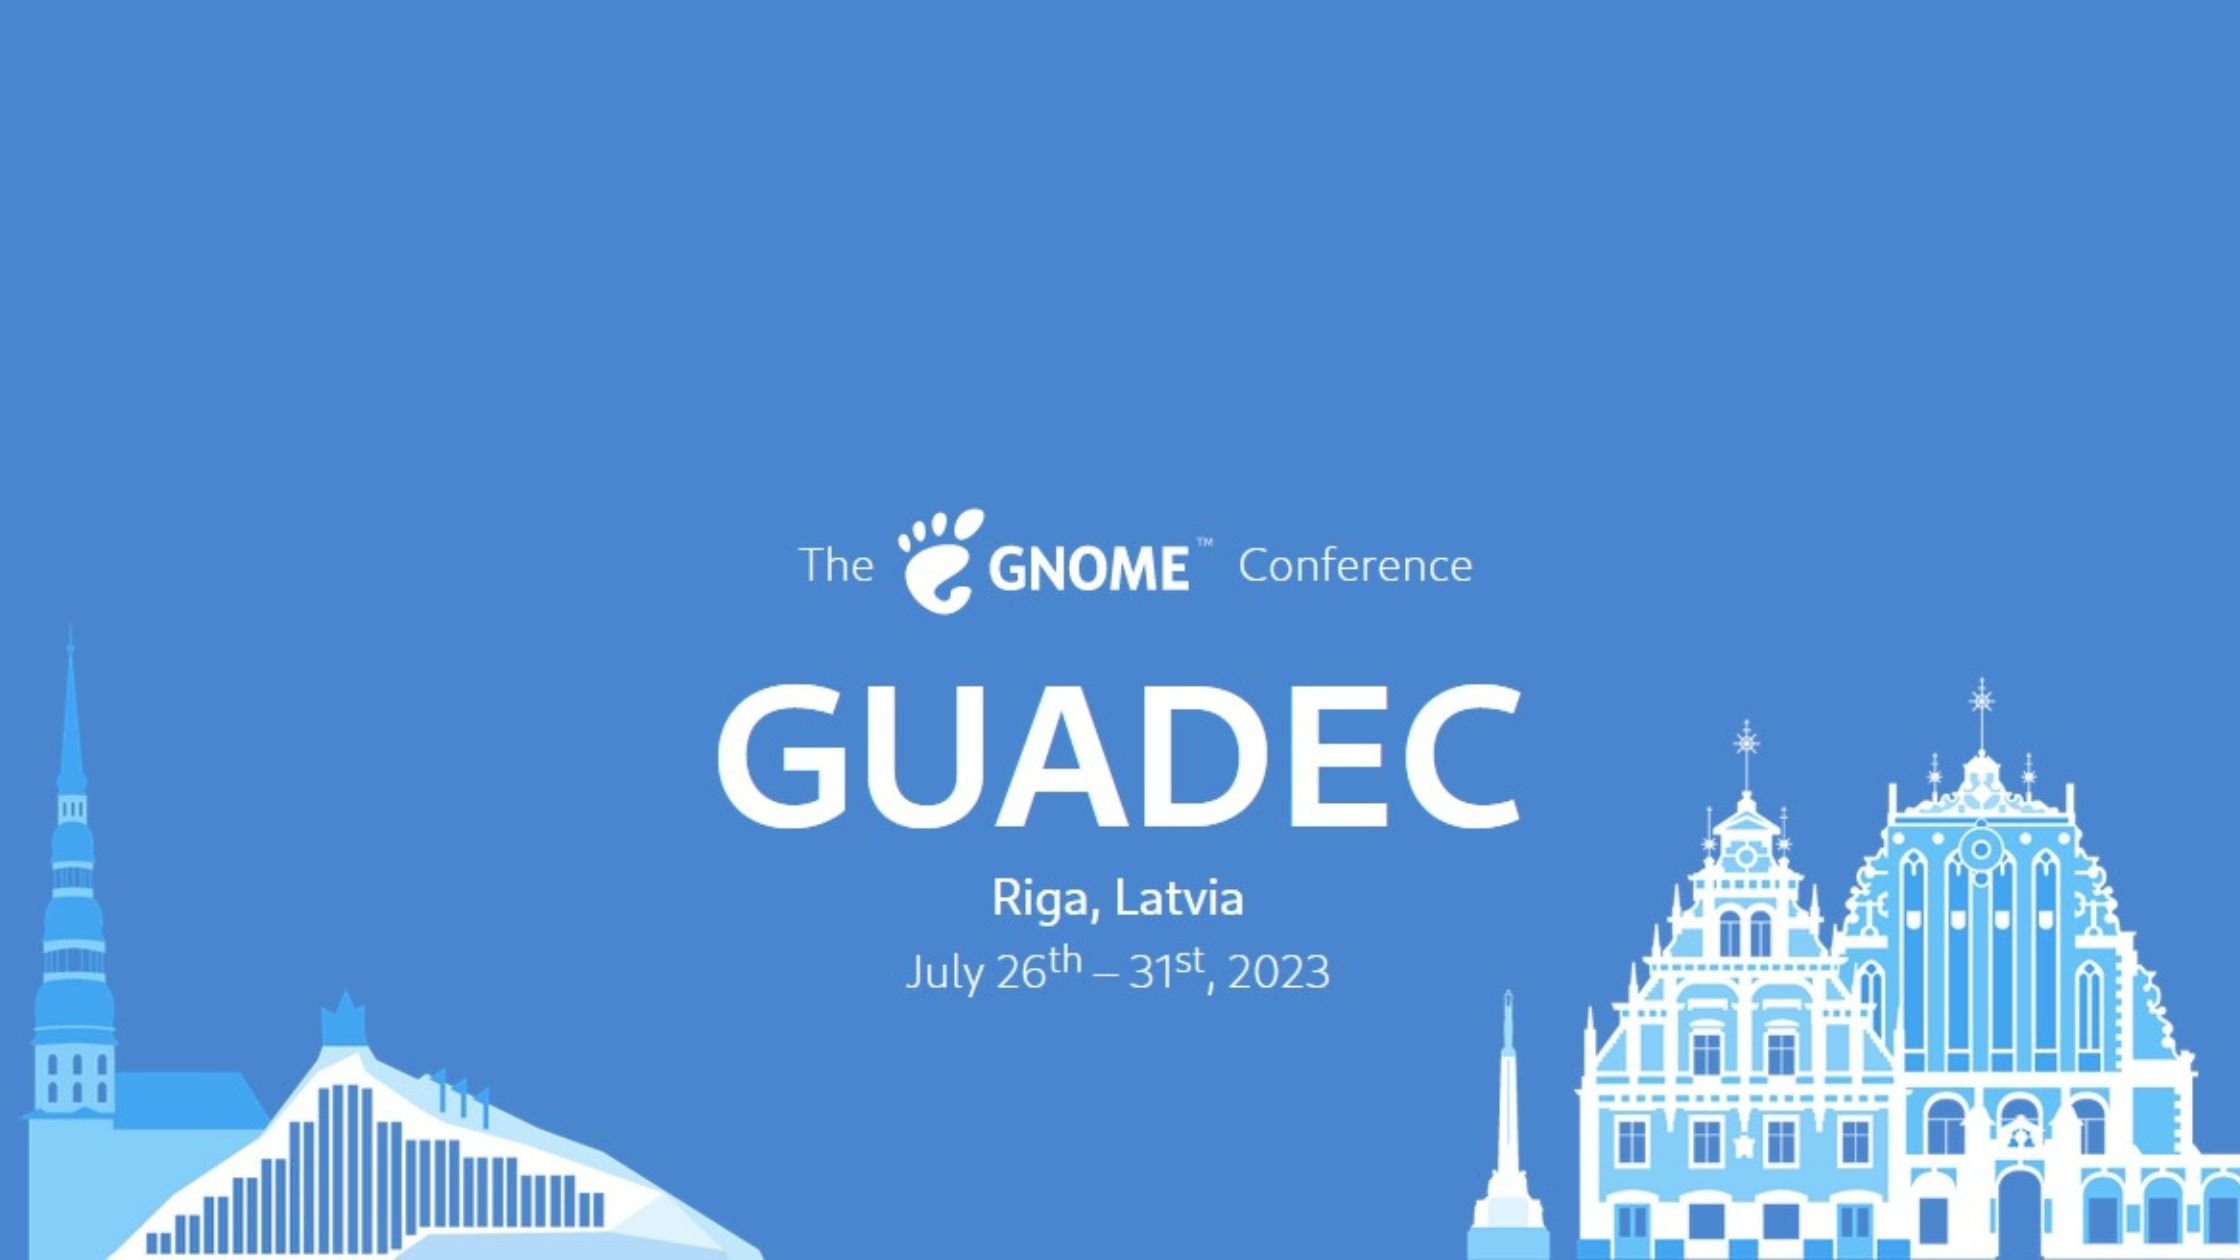 GUADEC 2023 Conference Speakers, Date And Location Details